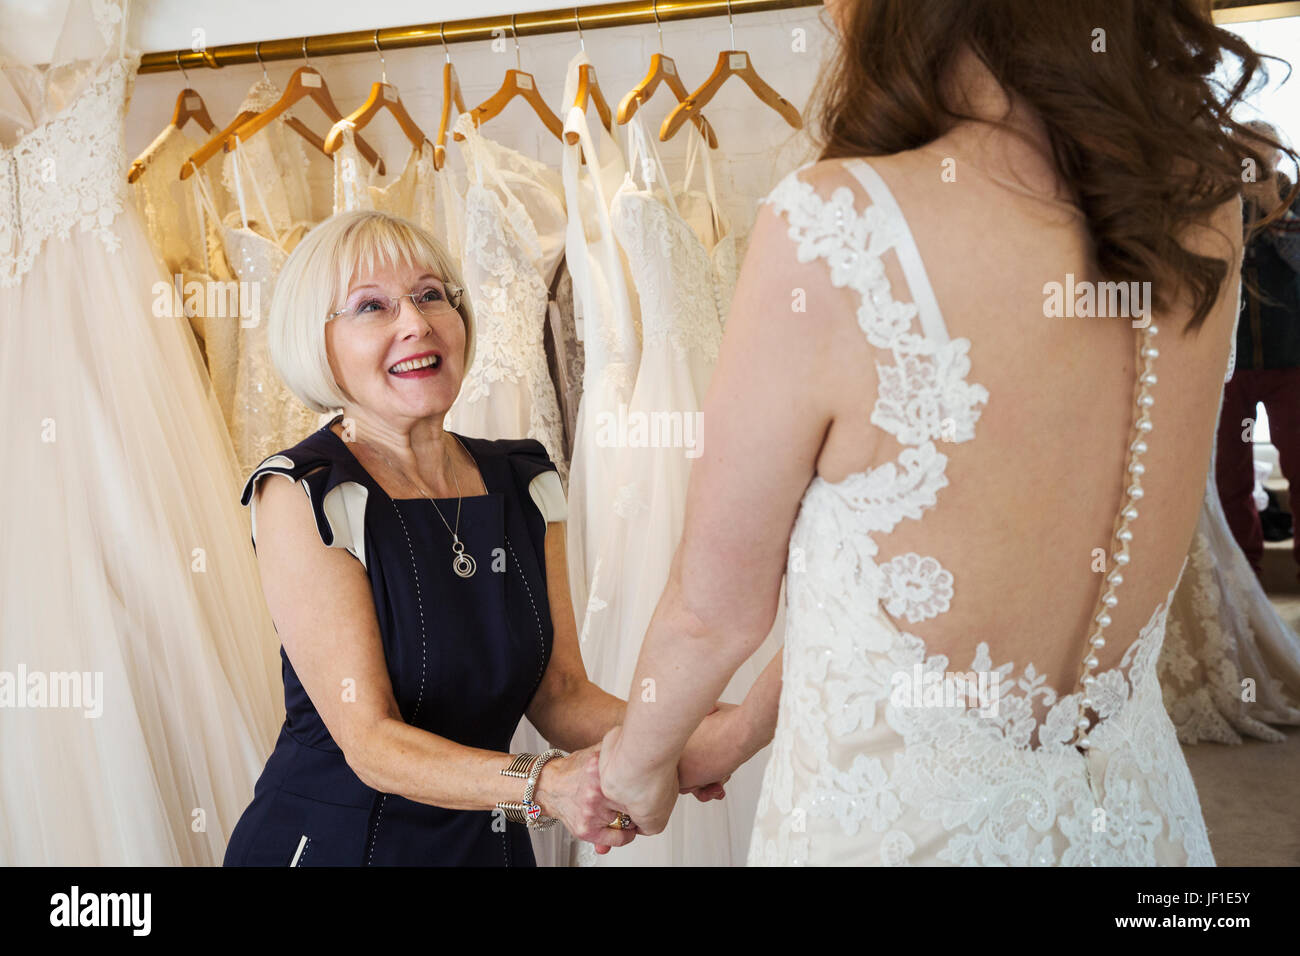 A Woman A Bride To Be Trying On Dresses With The Help Of A Sales Assistant In A Wedding Dress 8259